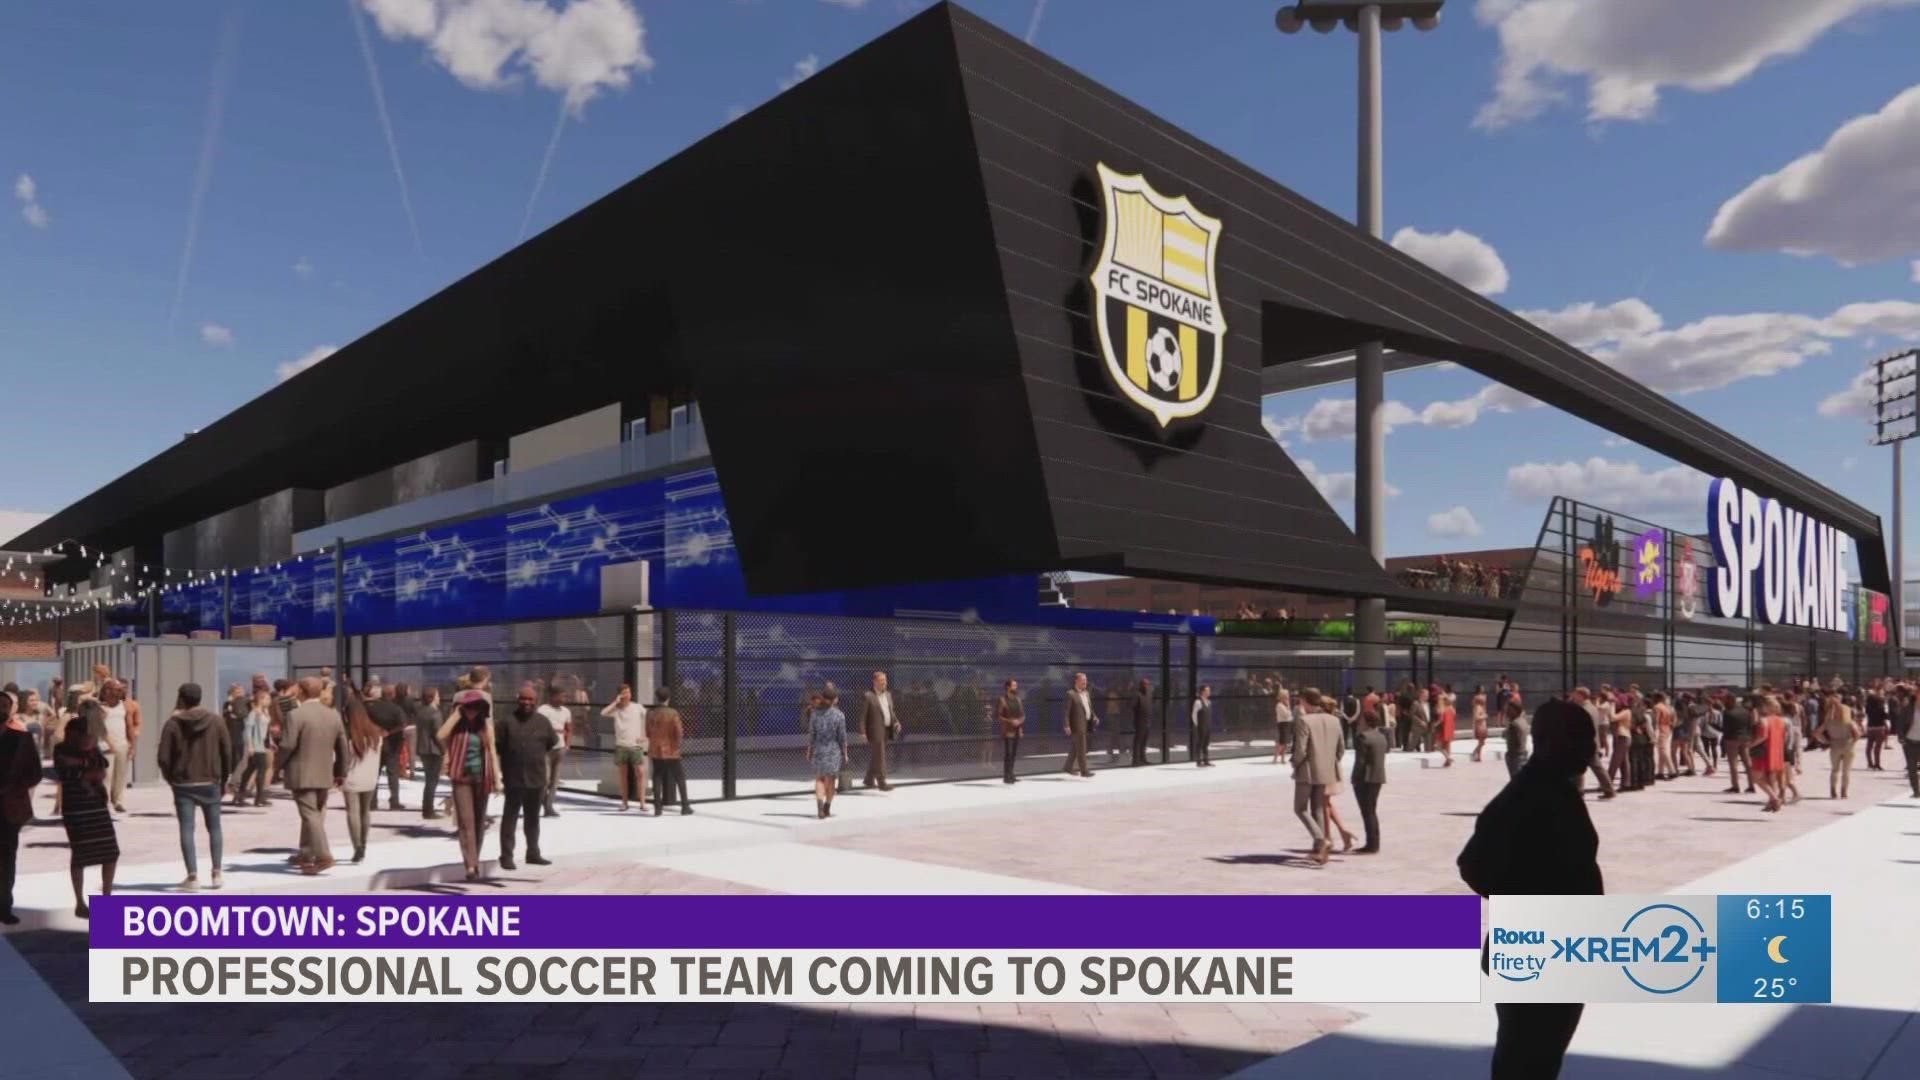 KREM 2's Mark Hanrahan had the chance to sit down with the teams' owners to talk timelines, tickets and why they chose Spokane.